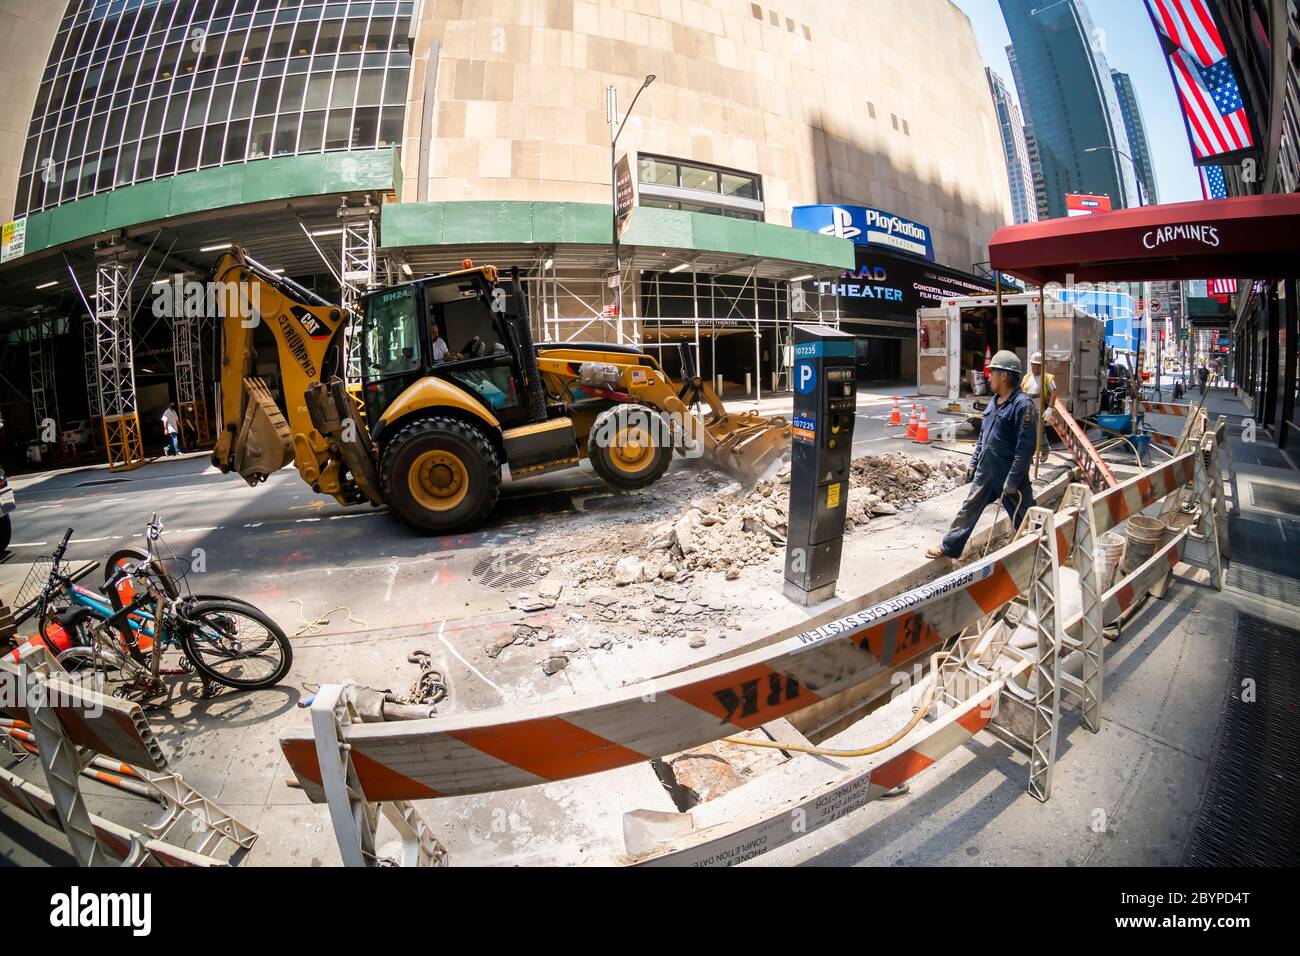 Workers do street construction in Times Square in New York on Tuesday, June 9, 2020. The city officially entered Phase One of its reopening yesterday. (© Richard B. Levine) Stock Photo